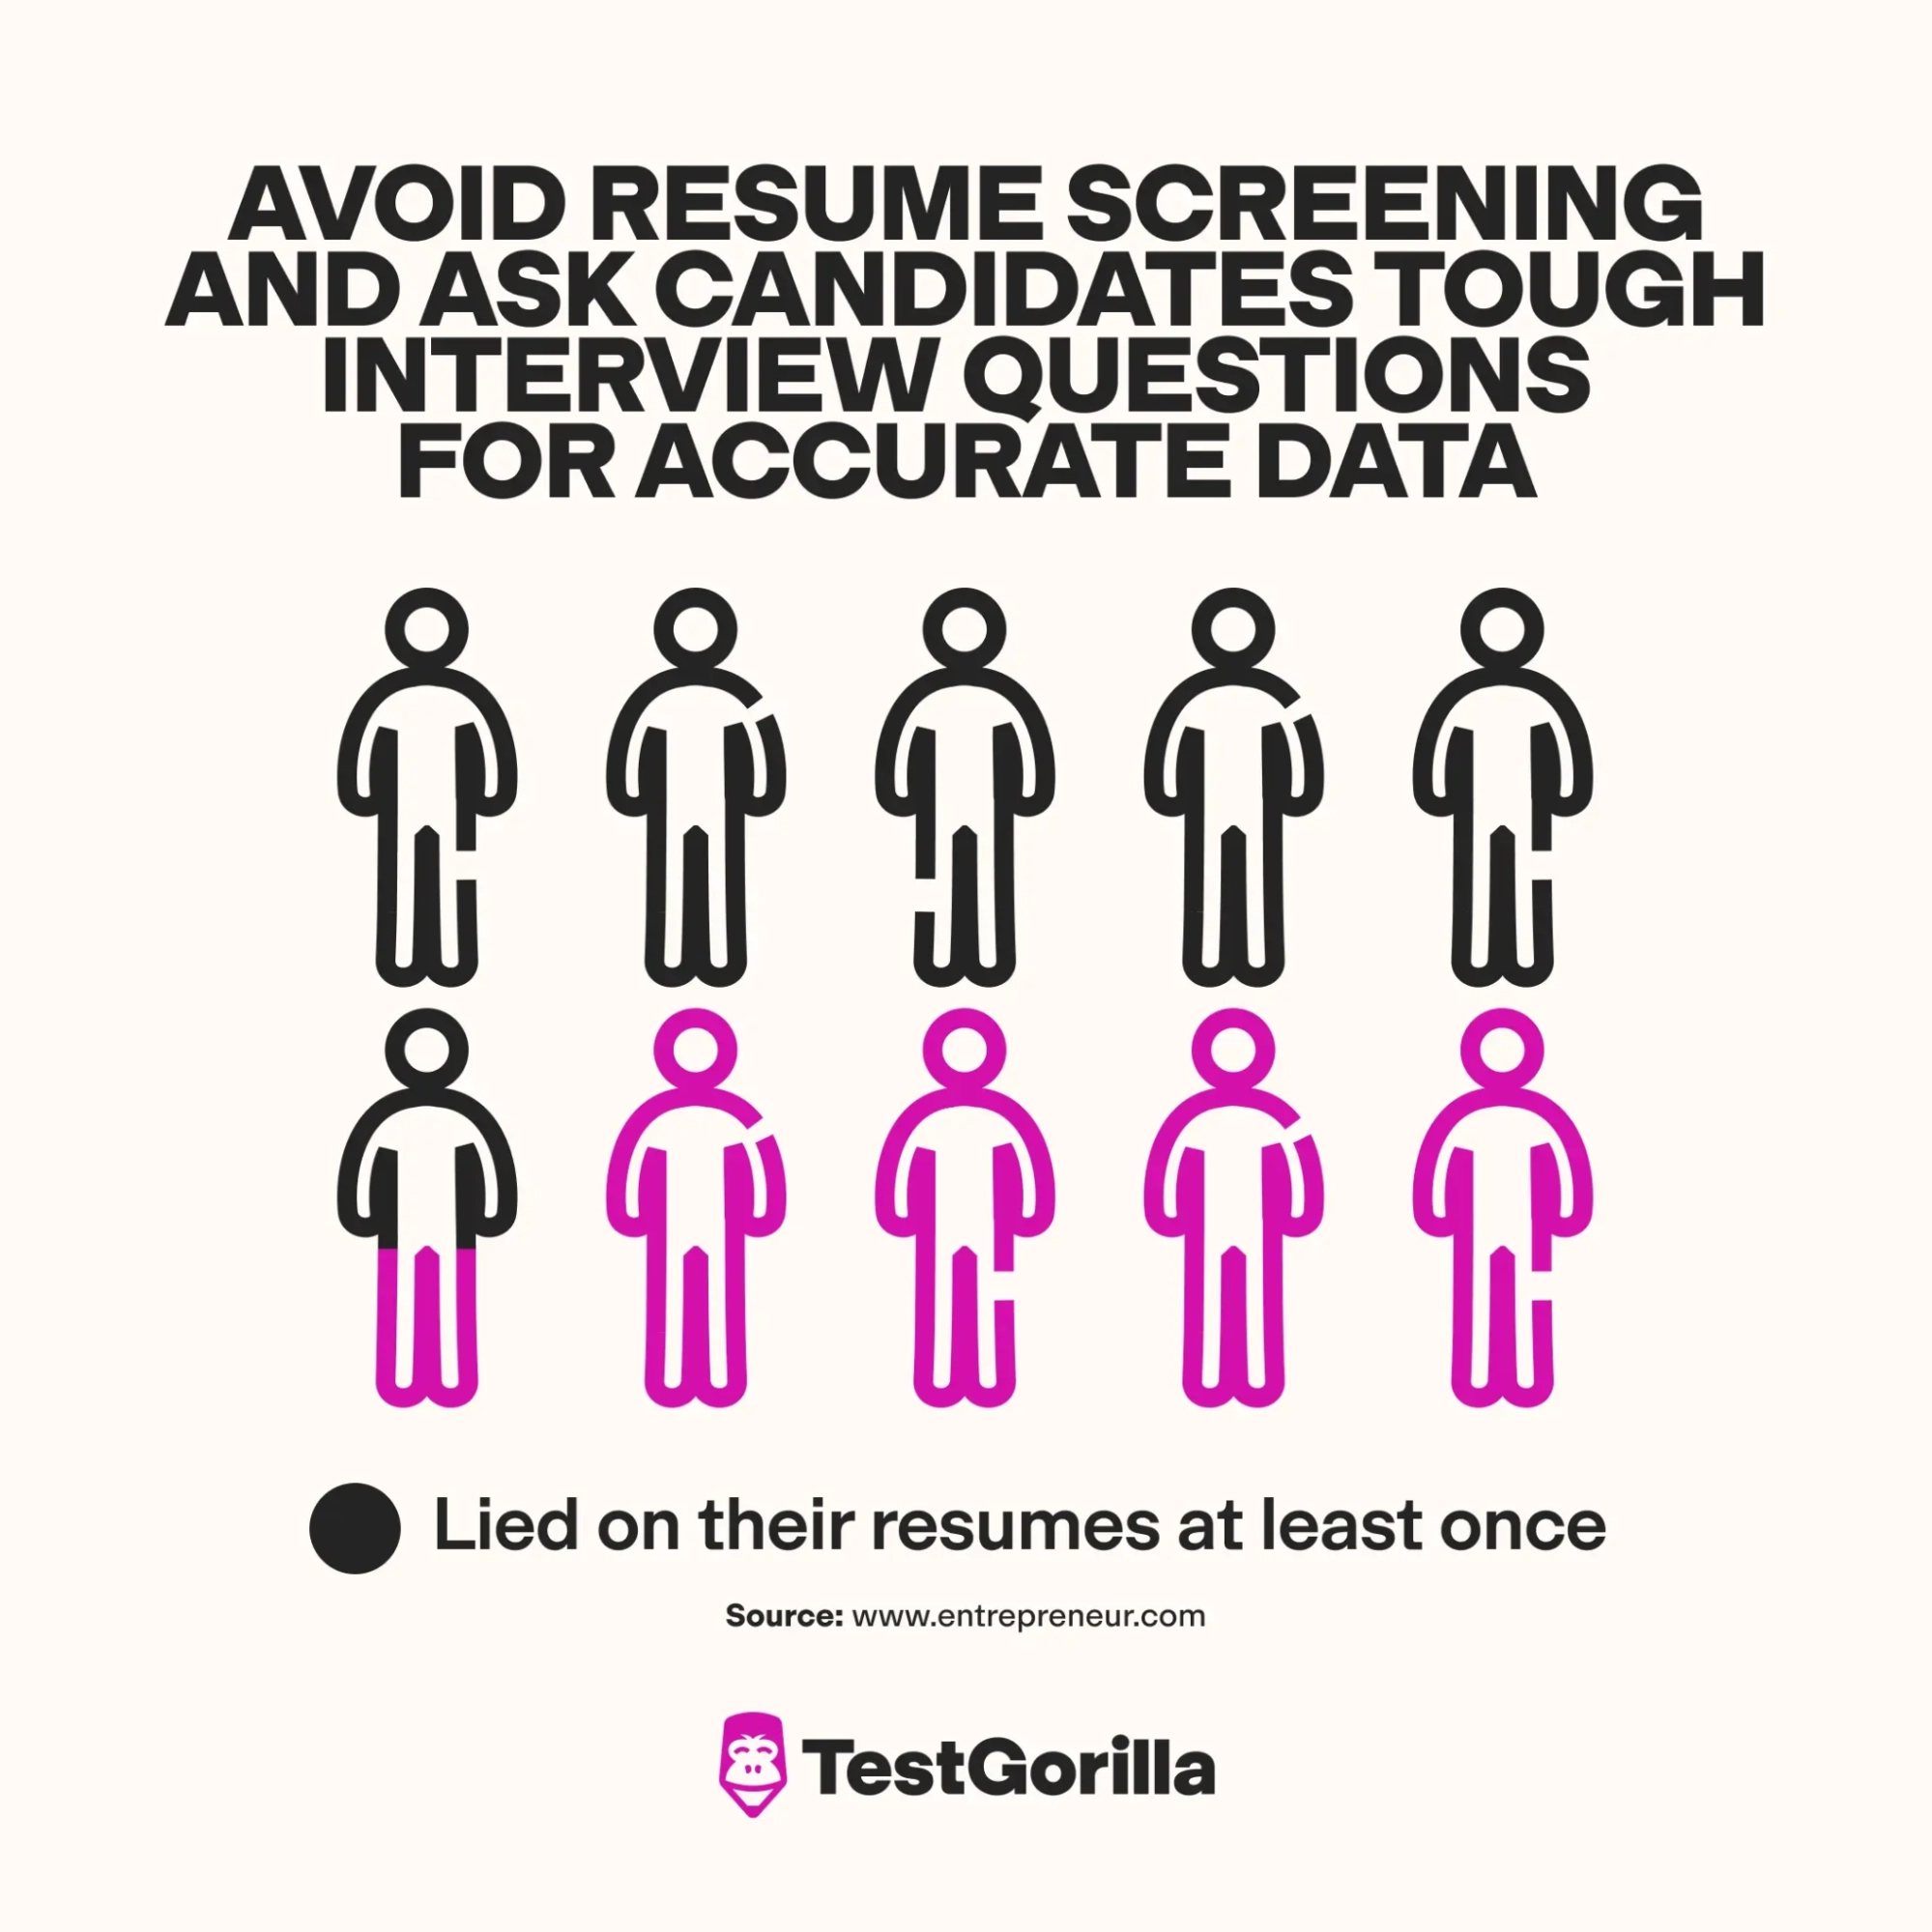 Avoid resume screening and ask candidates tough interview questions for accurate data